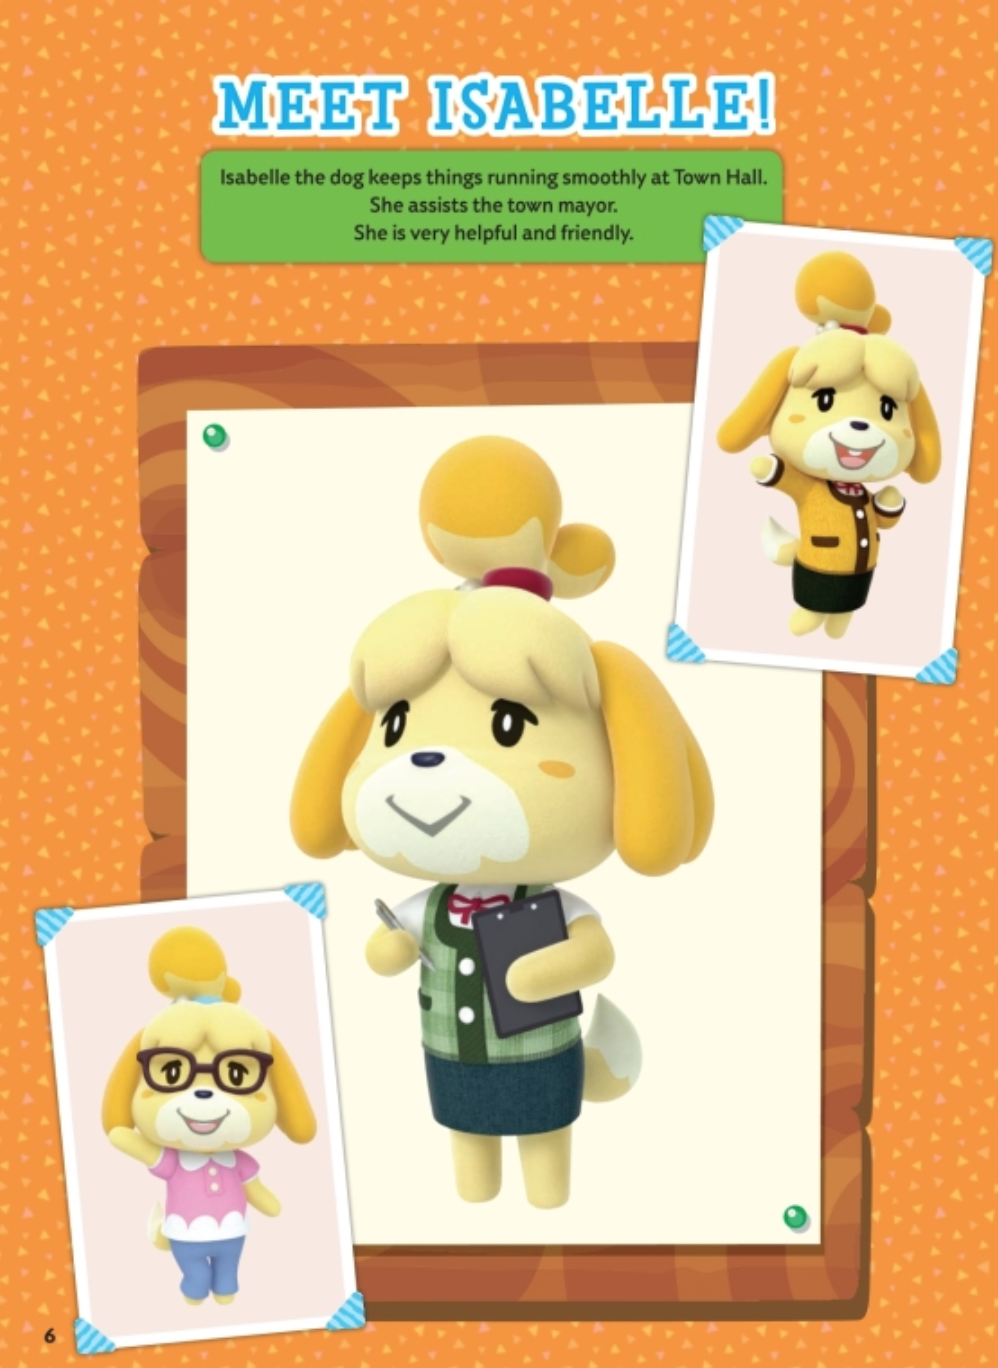 29 Things That You’ll Love If You’re A Villager In Animal Crossing